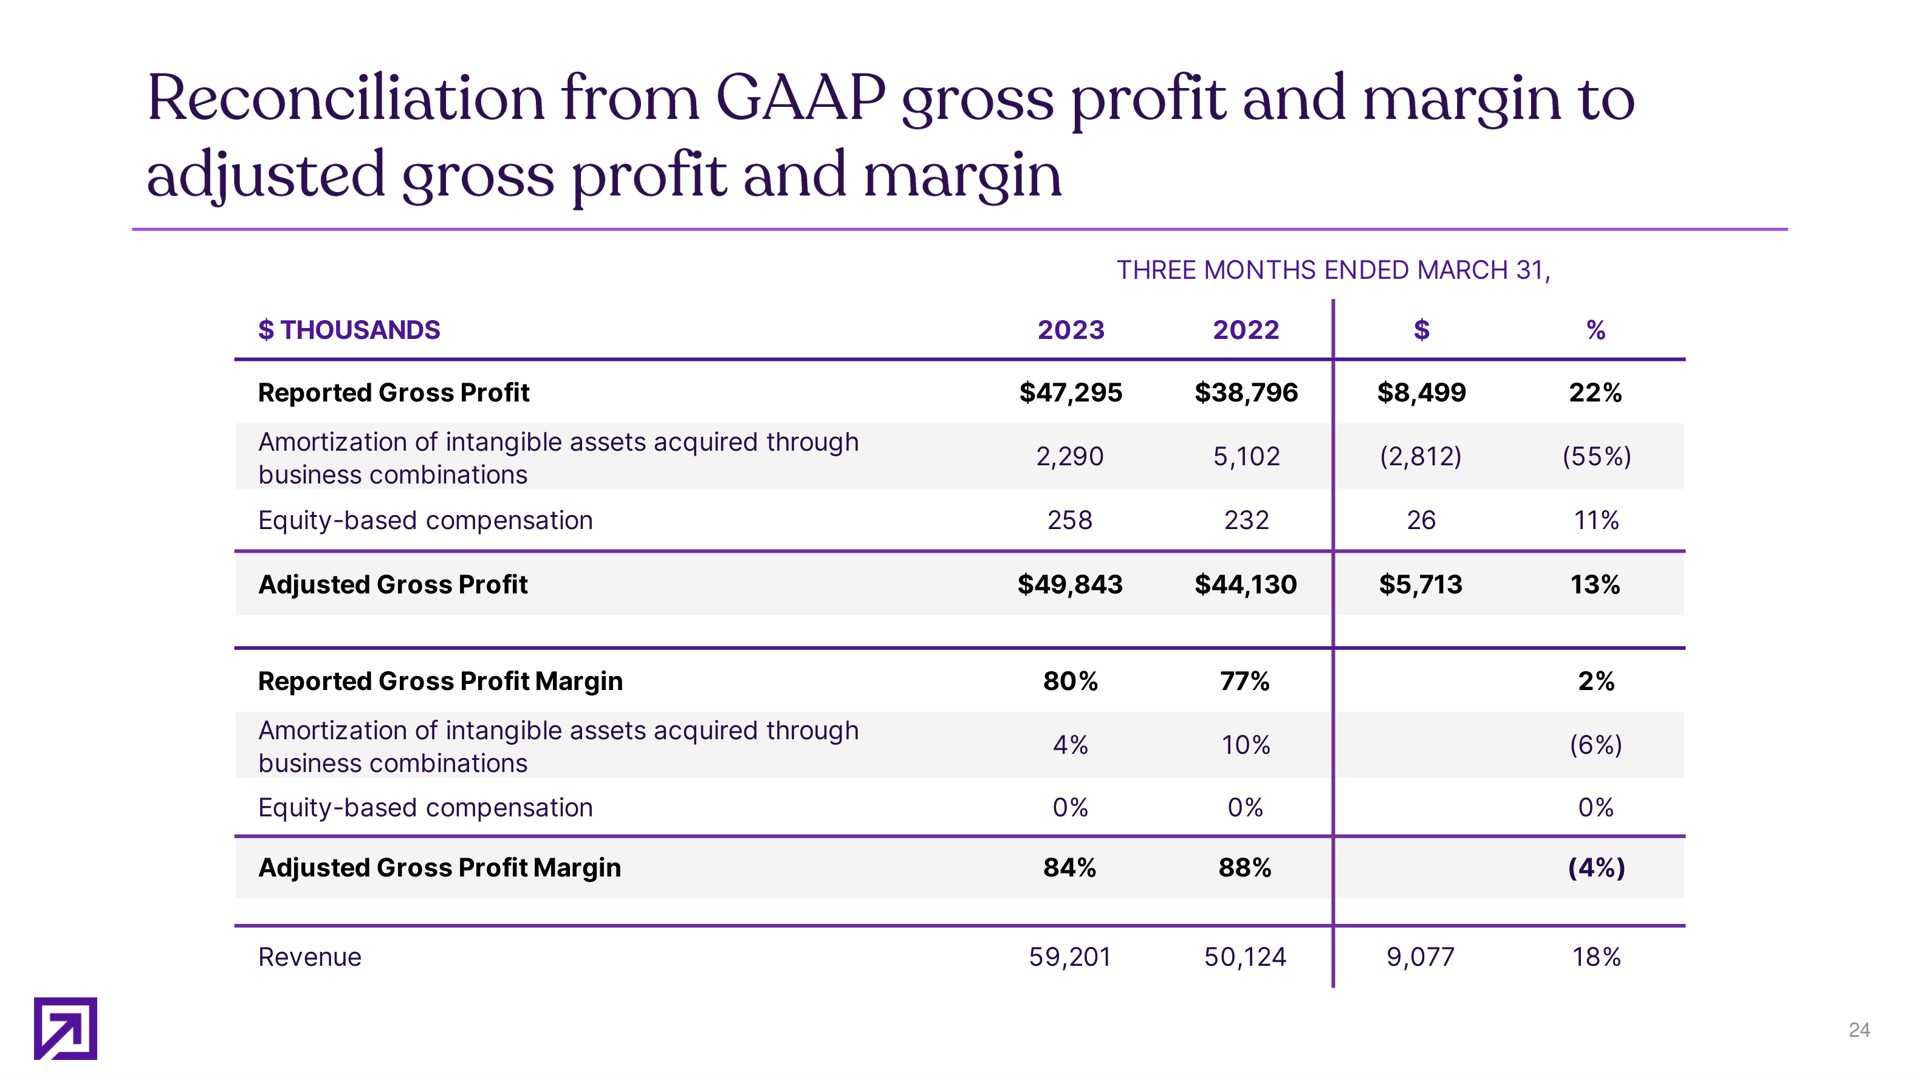 reconciliation from gross profit and margin to adjusted gross profit and margin | Definitive Healthcare